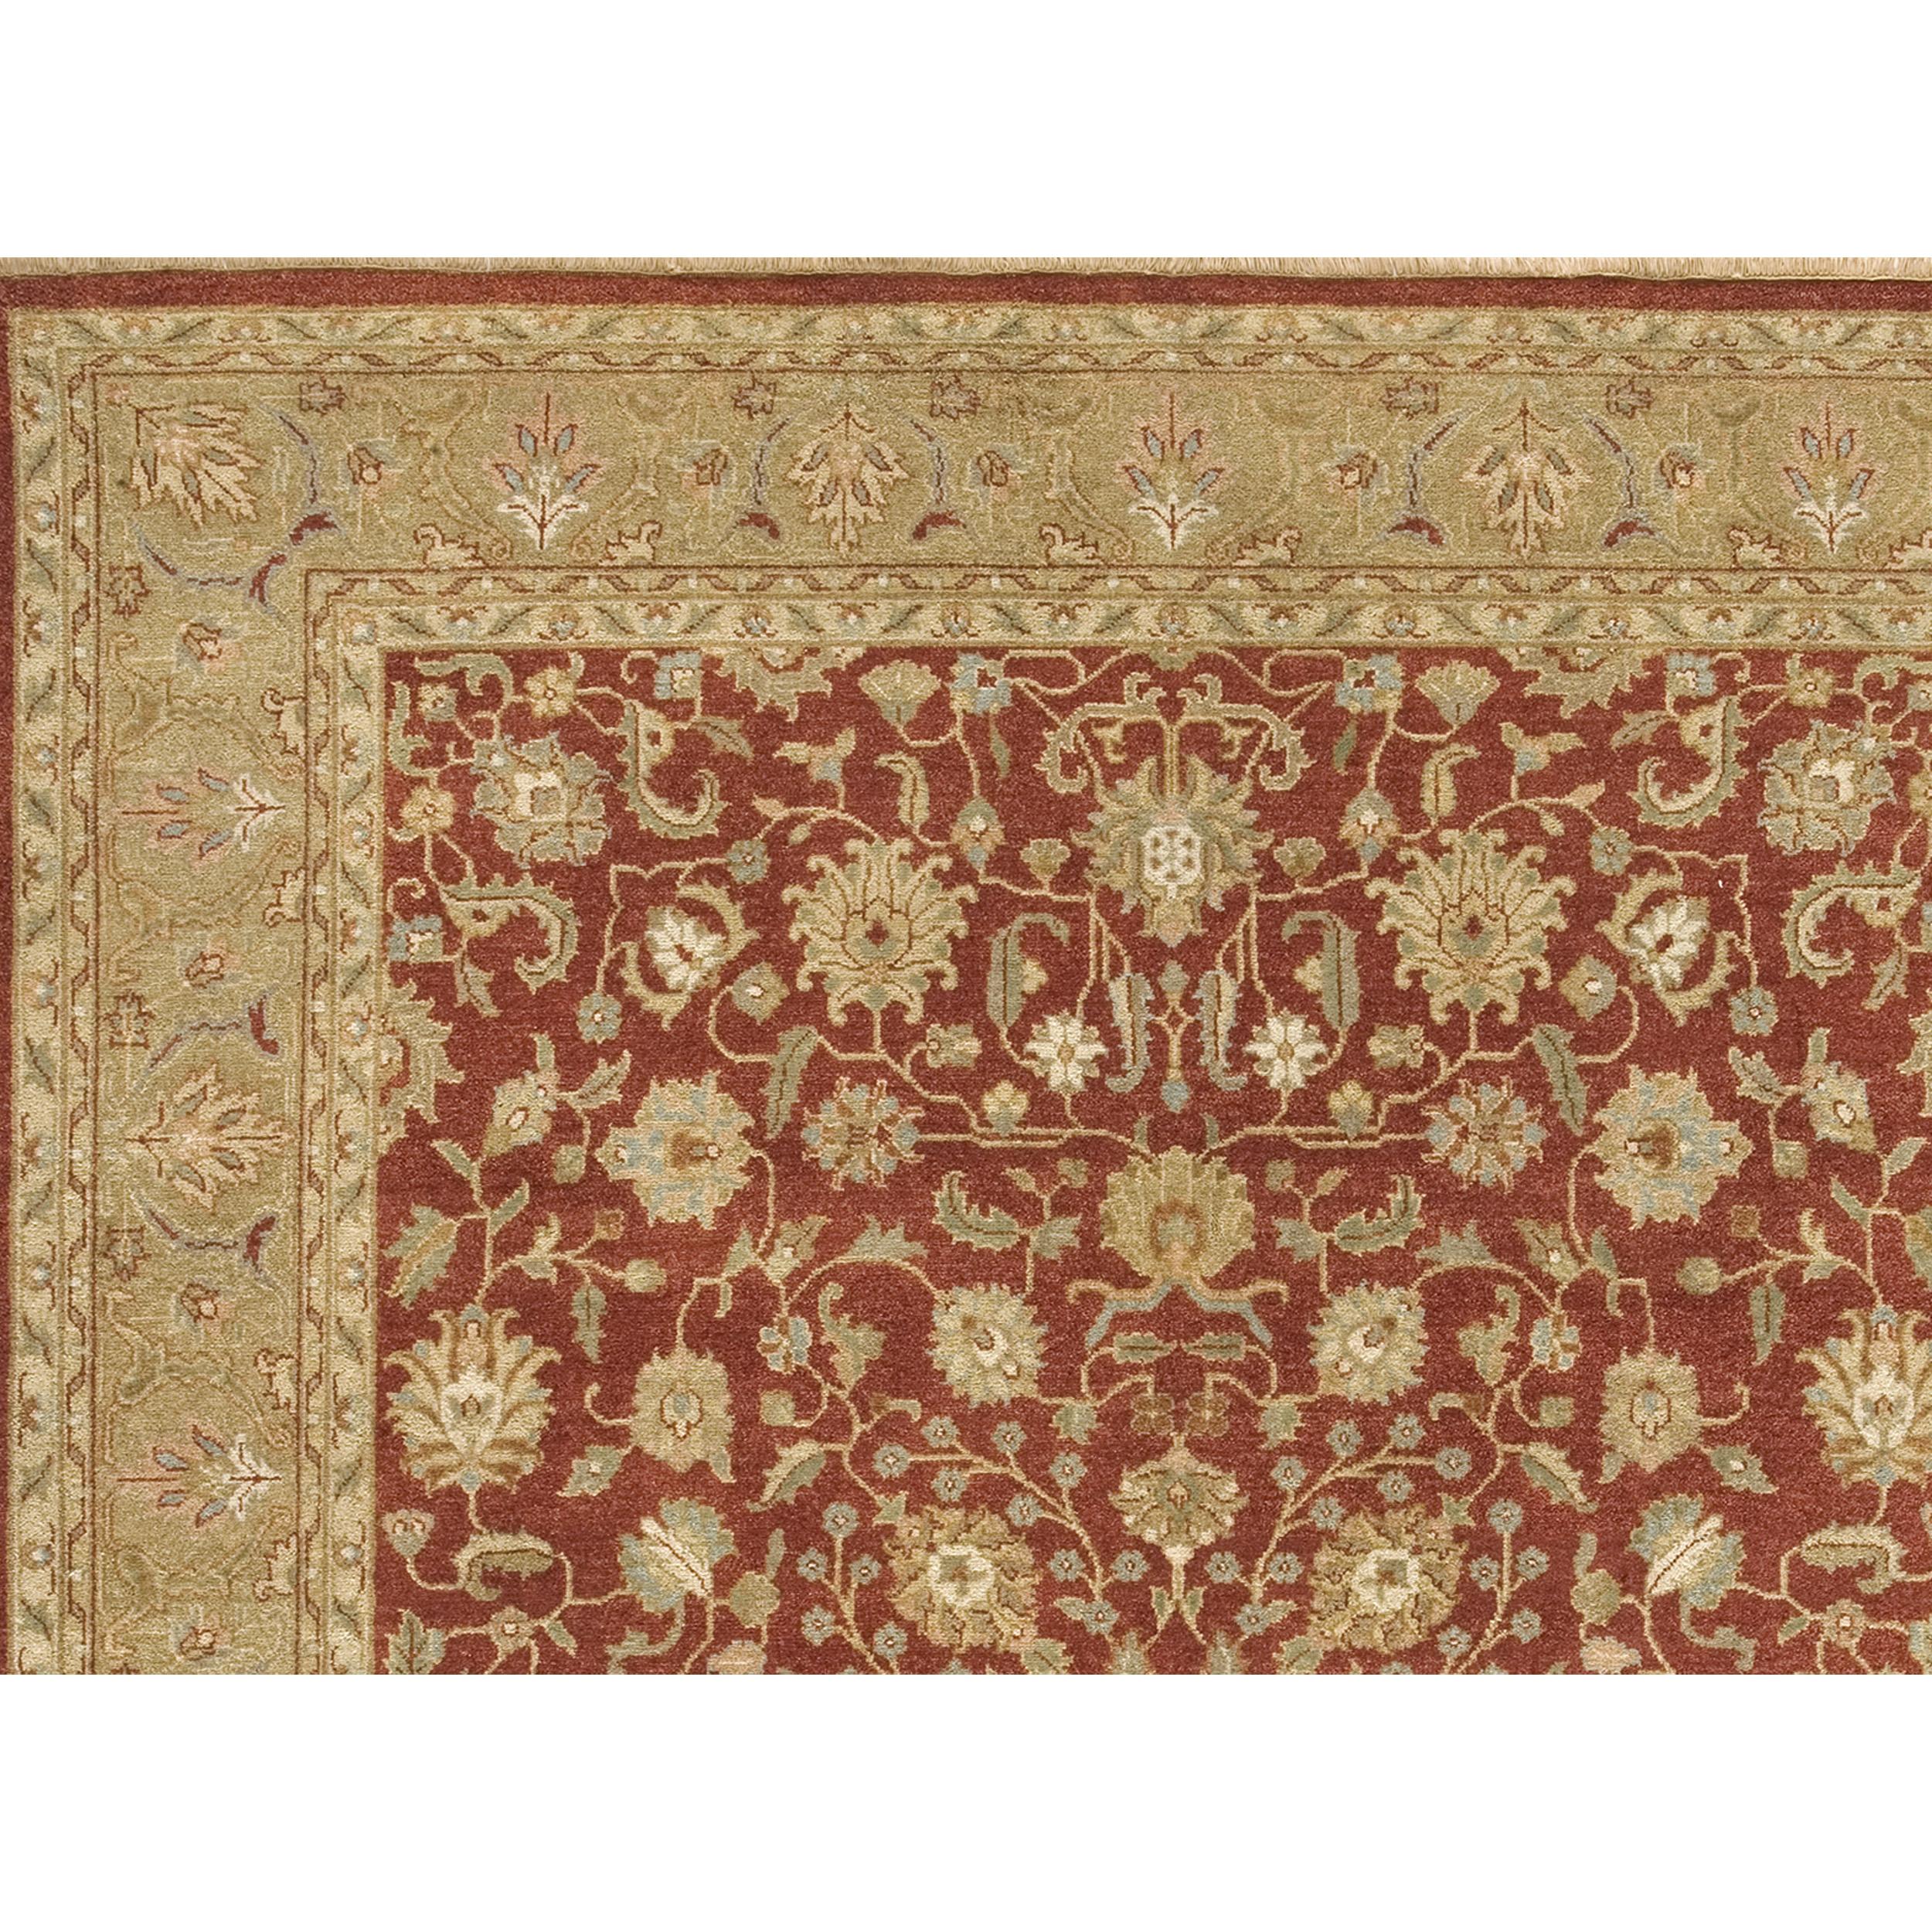 Luxury Traditional Hand-Knotted Kashan Brick & Khaki 12x22 Rug In New Condition For Sale In Secaucus, NJ